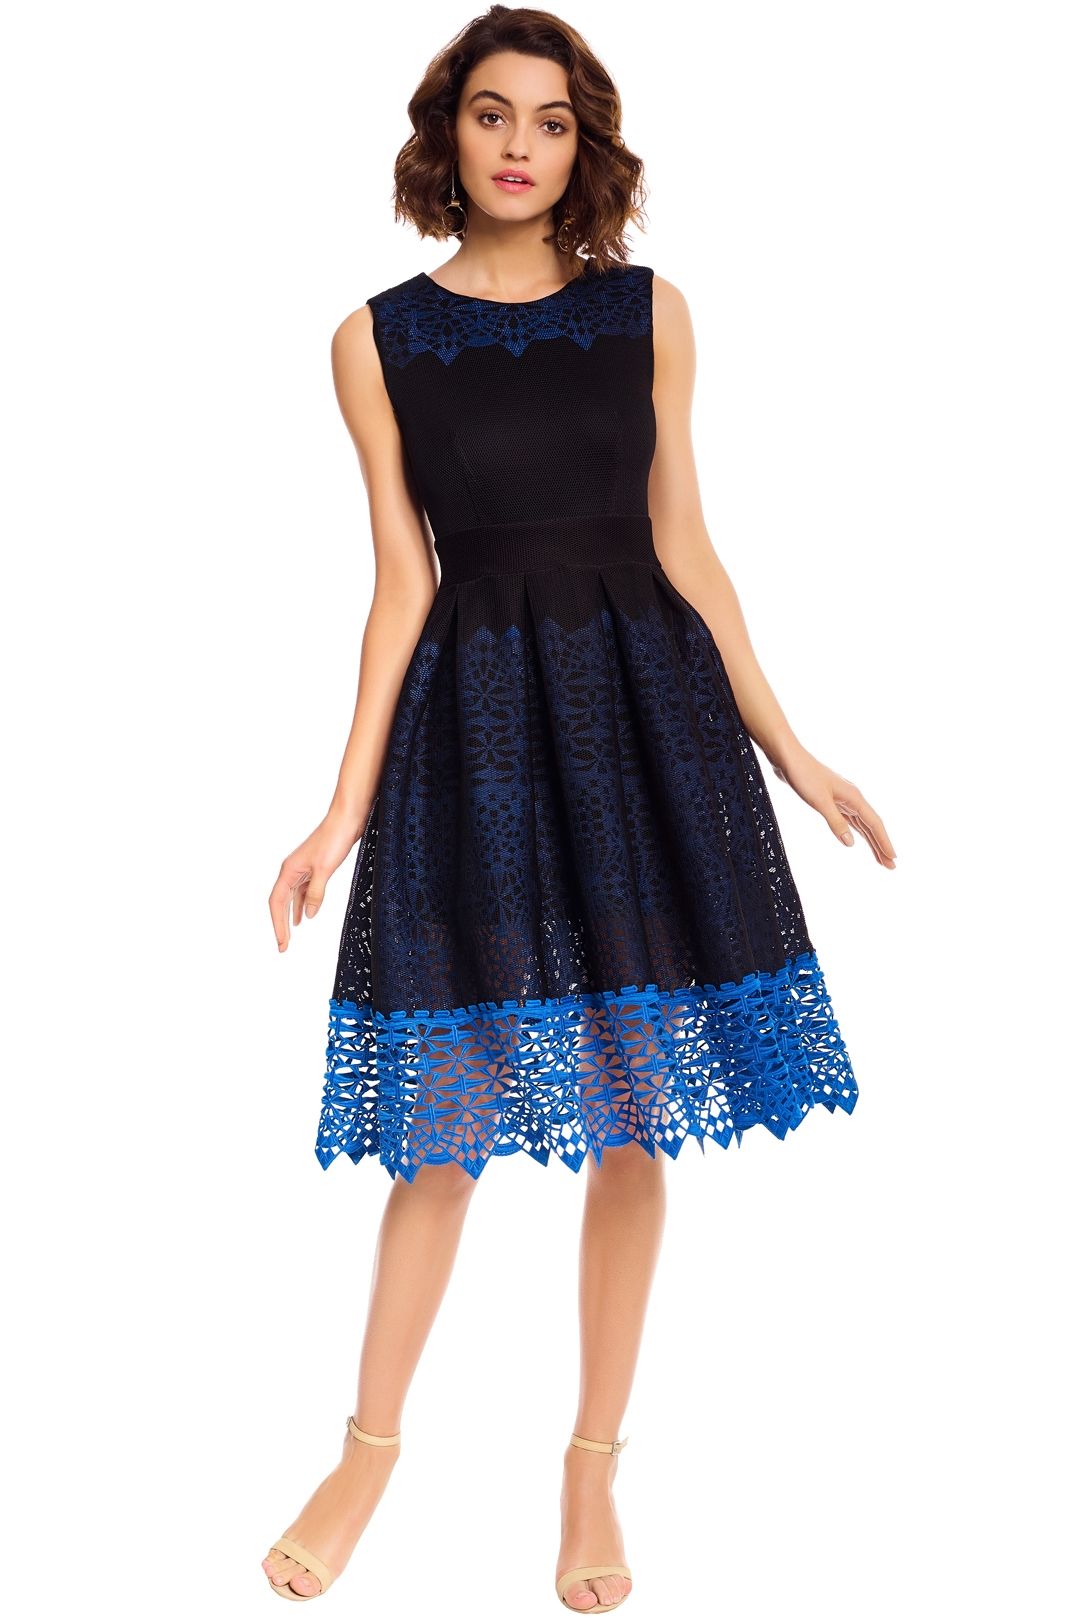 Maje - Russe Honeycomb Knit and Guipure Dress - Navy Blue - Front